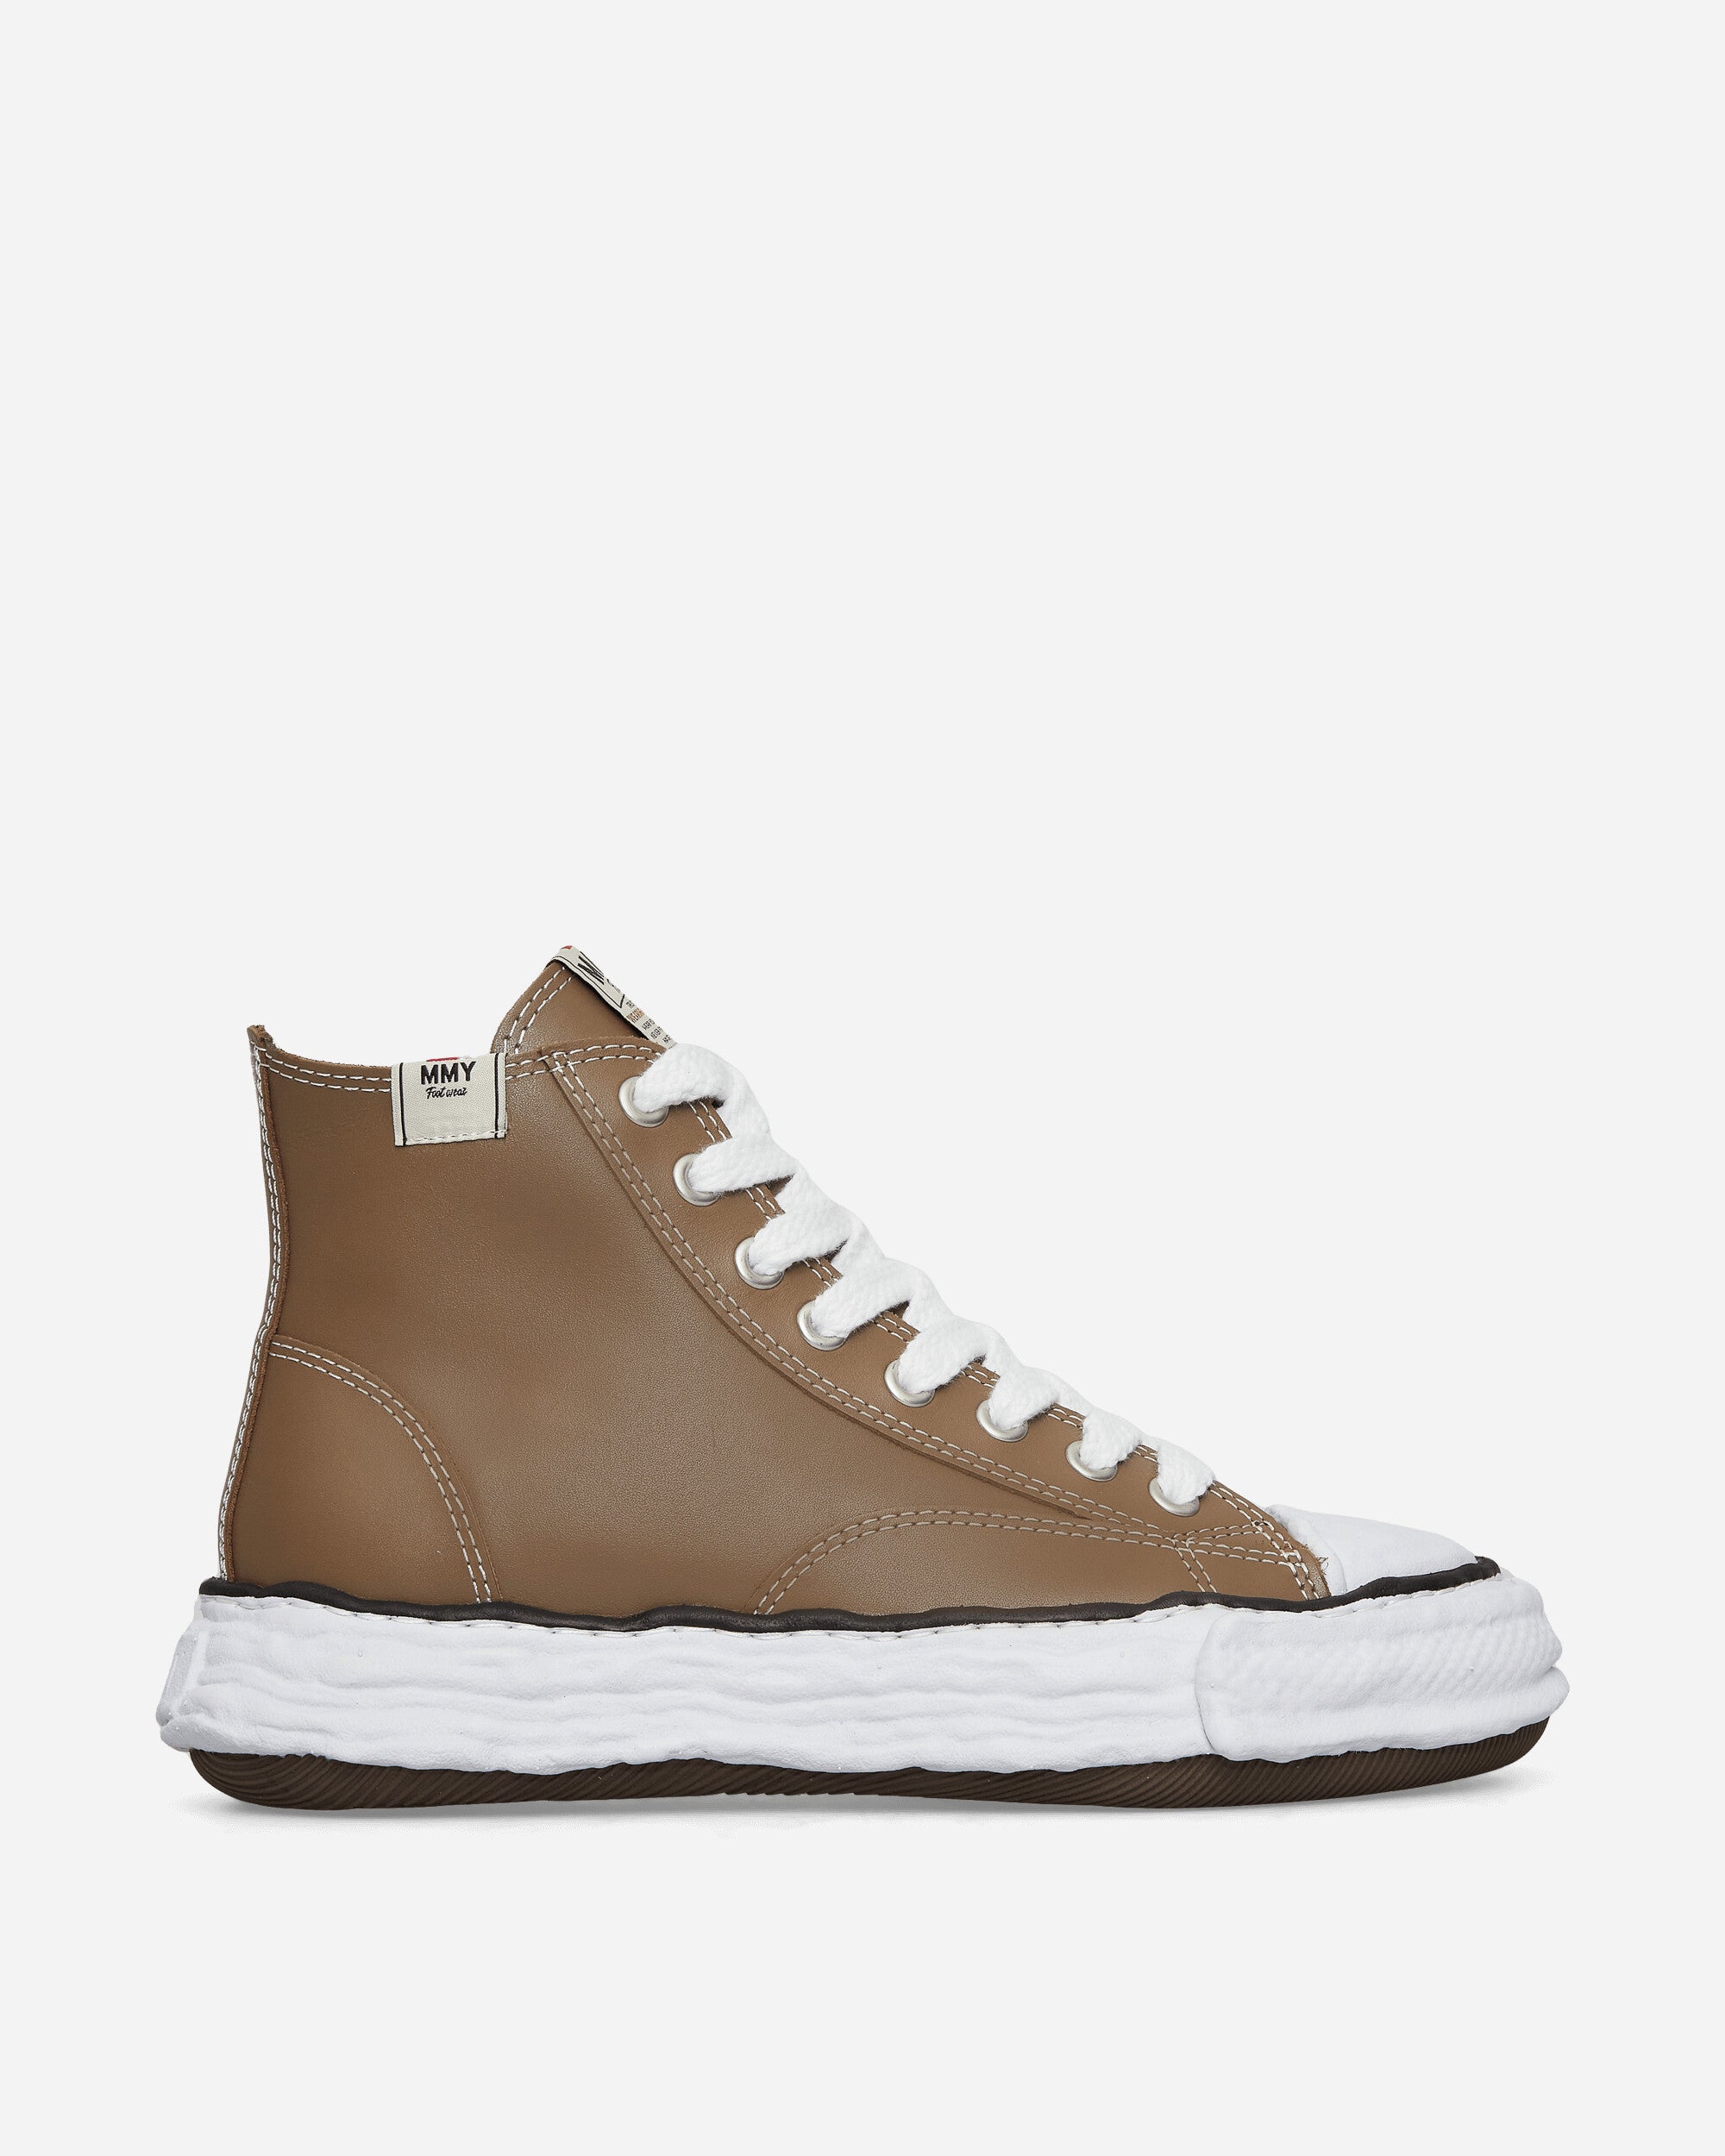 Maison MIHARA YASUHIRO Peterson 23 High/ Original Sole Leather Brown Sneakers High A11FW703 WHITE